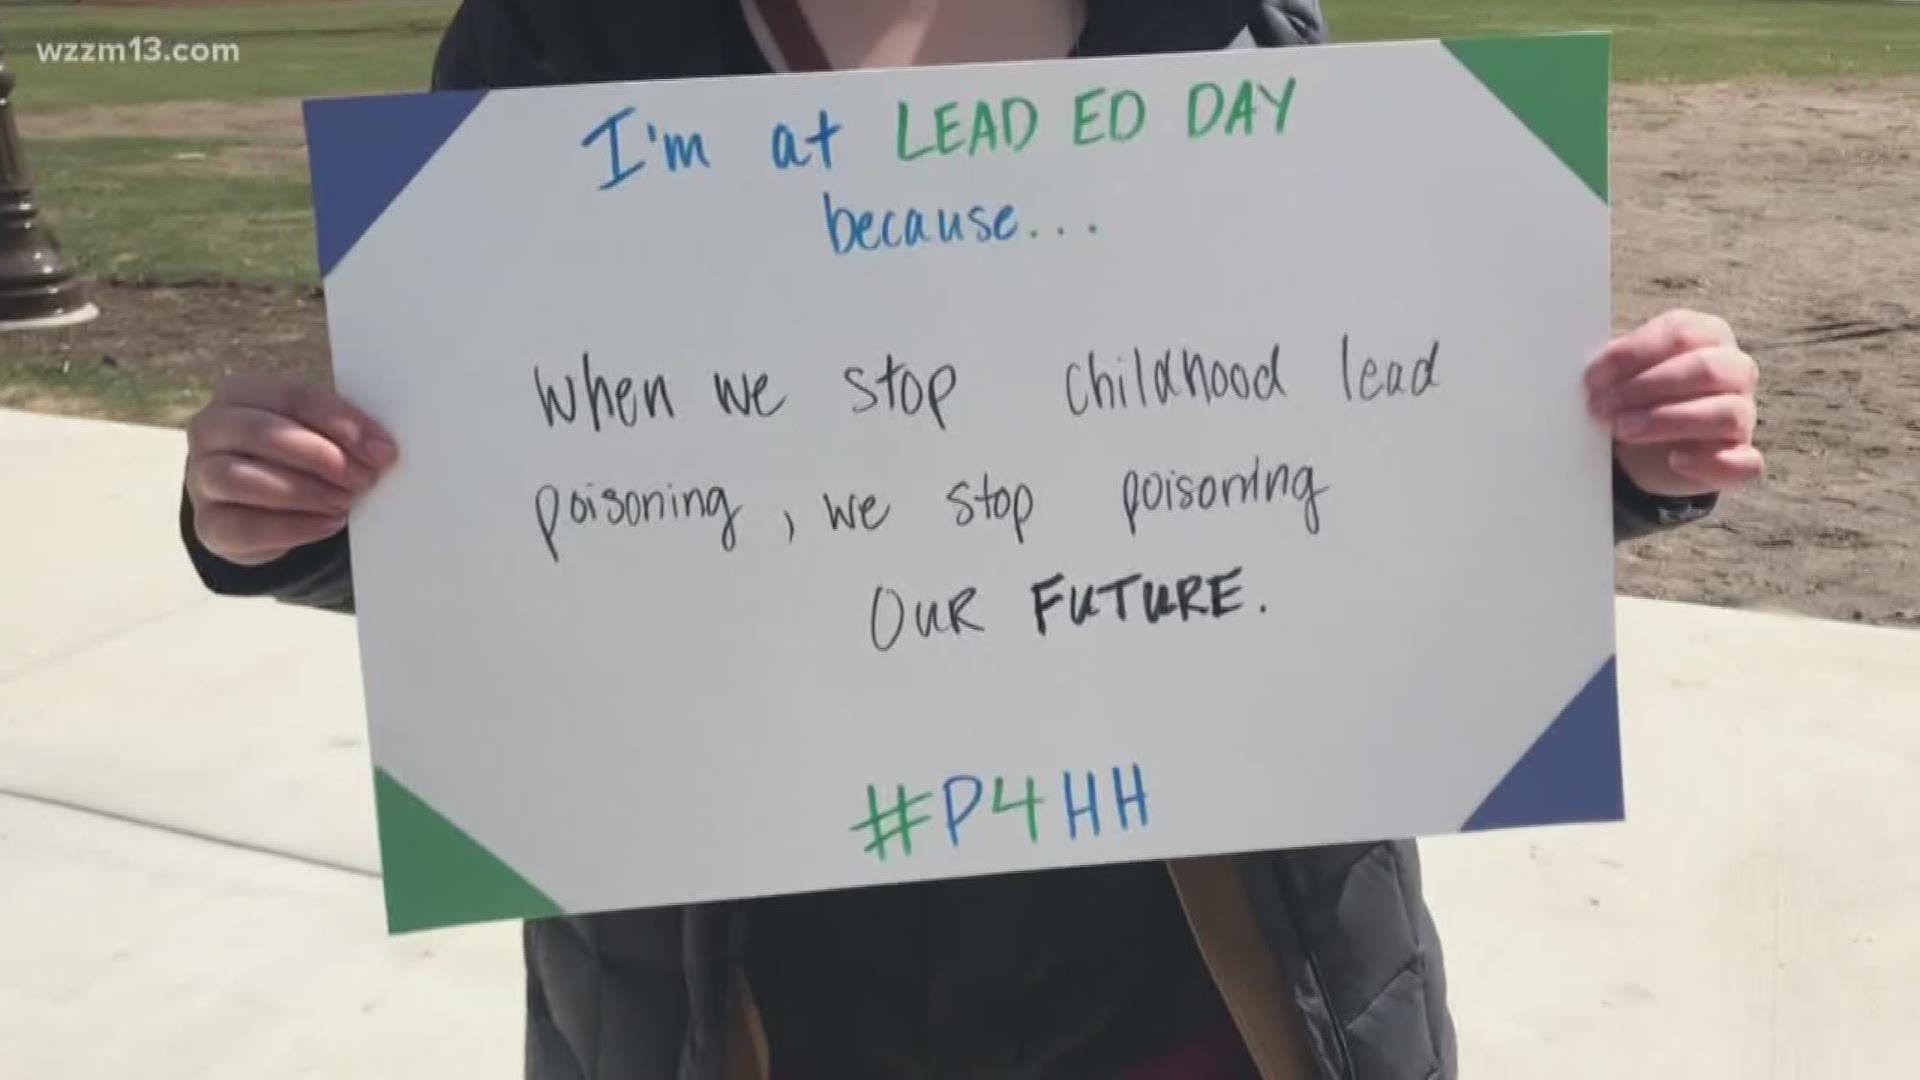 Lead Education Day in Lansing